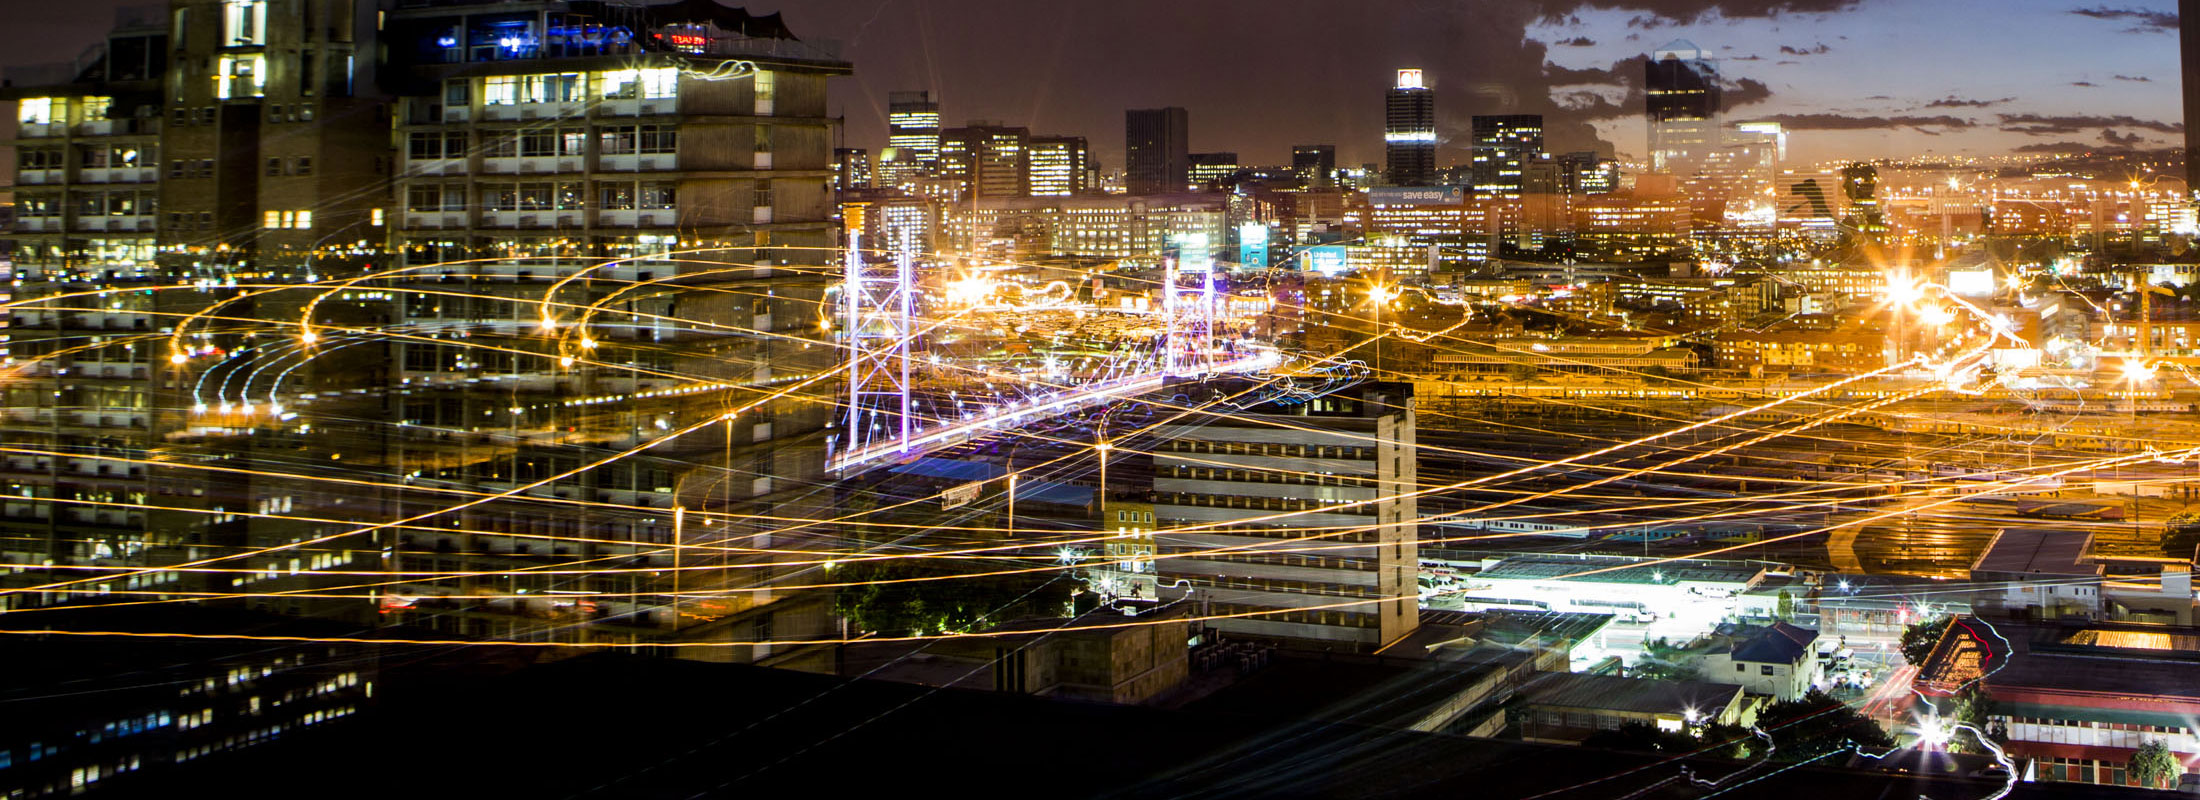 Johannesburg and its city lights at night